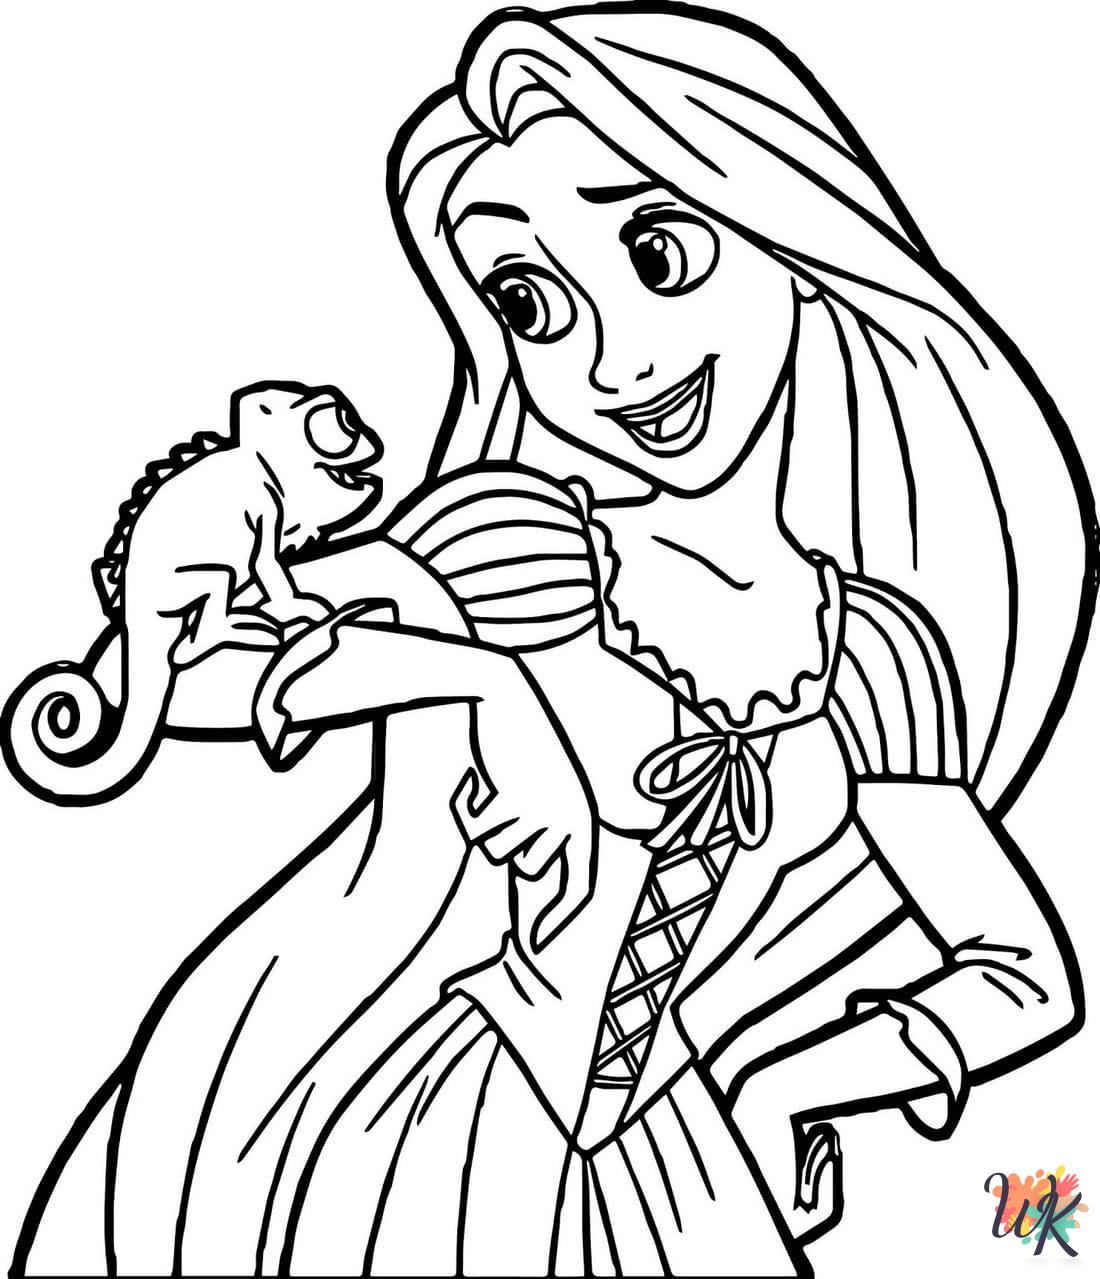 Tangled cards coloring pages